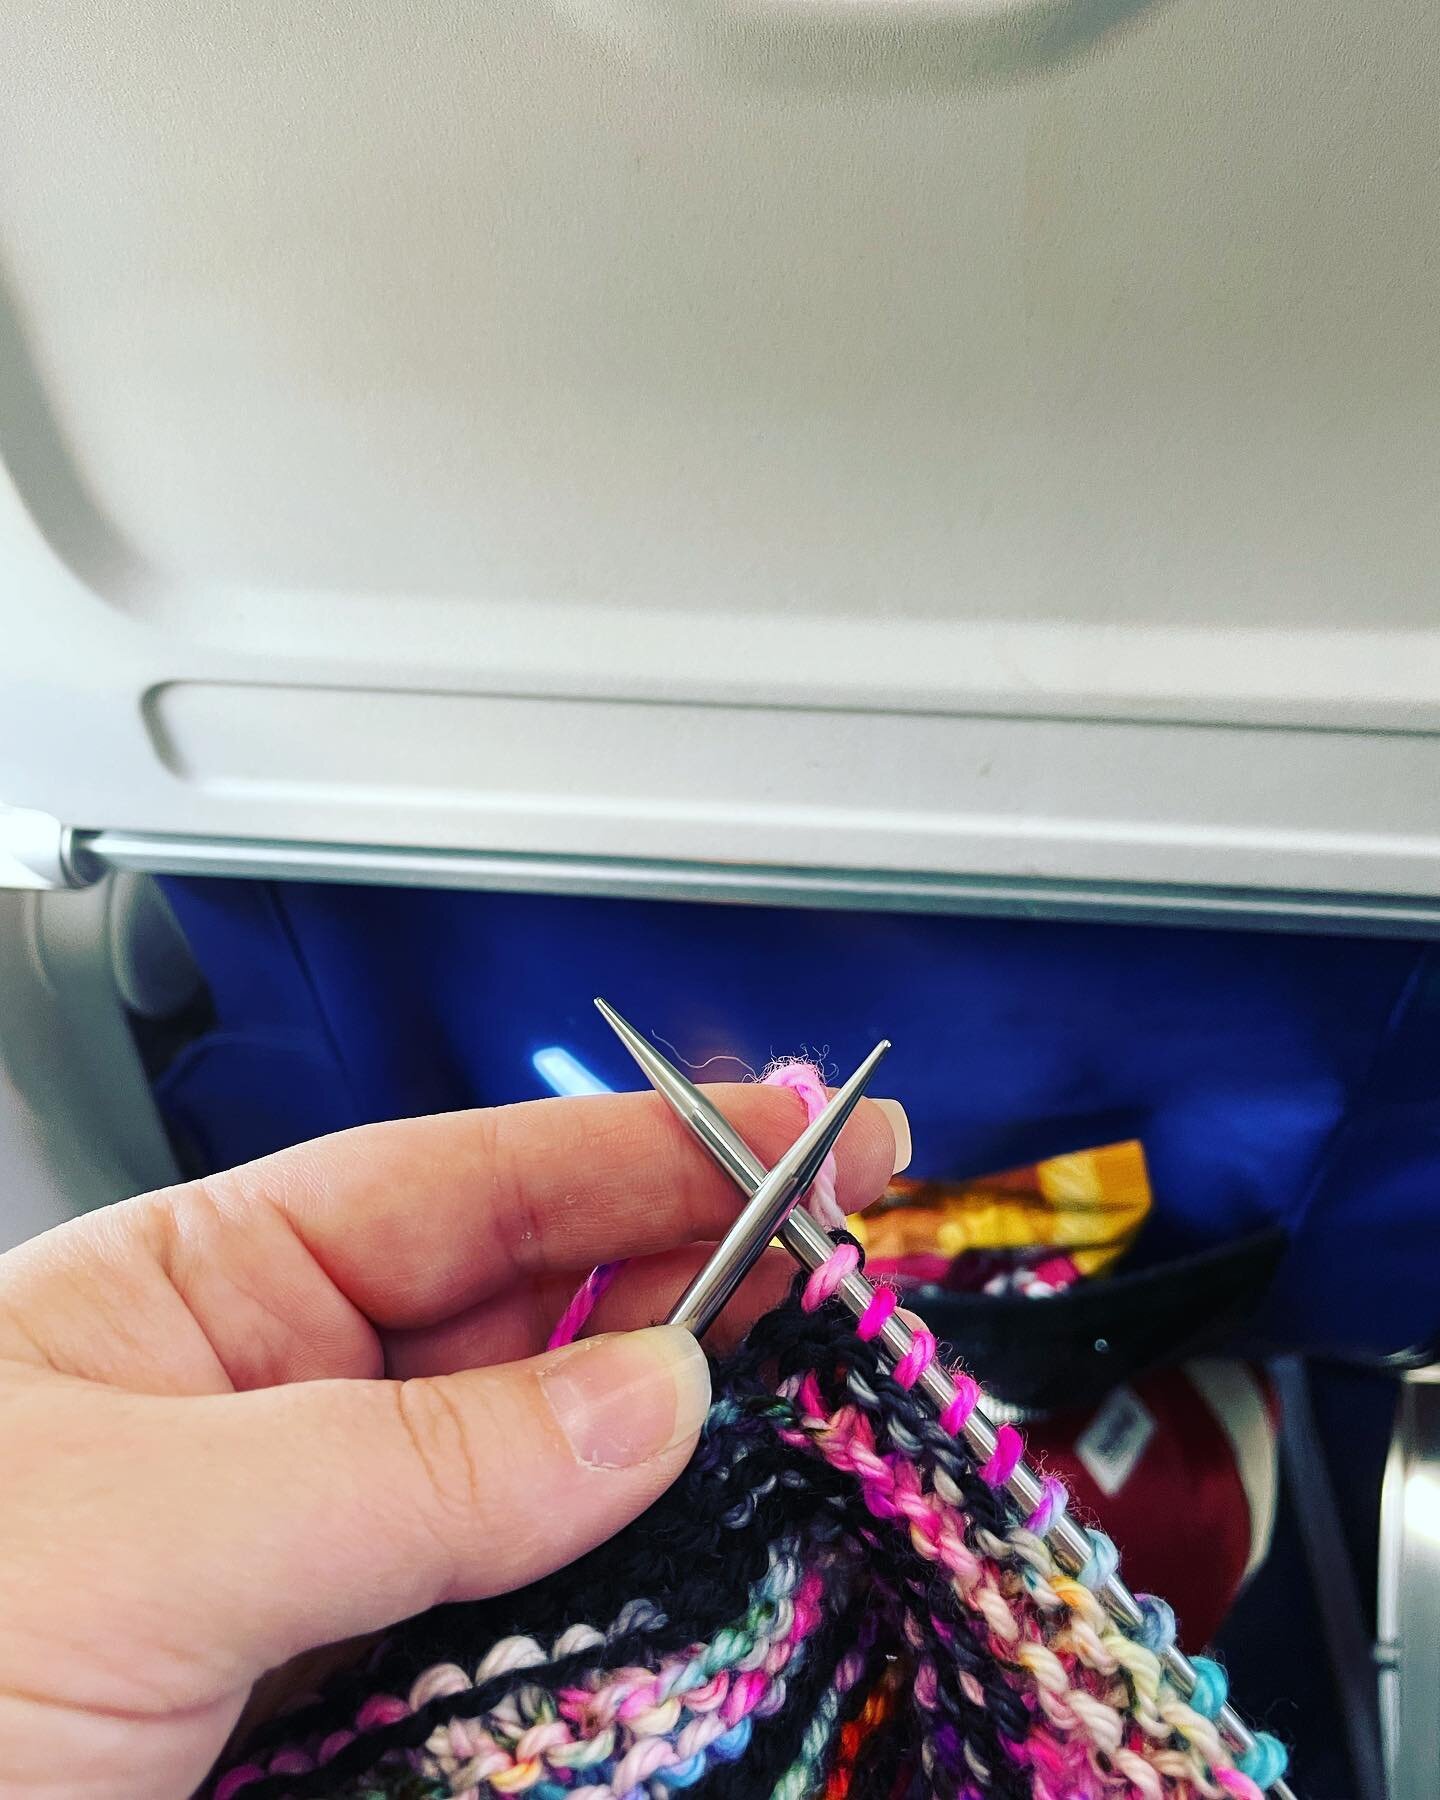 P L A N E knitting makes traveling so much more relaxing! Plus you get the added bonus of making a new friend when you discover your seat mate is also a knitter!!! 
..
..
#knittingfriends #airportknitting #planeknitting #cantstopknitting